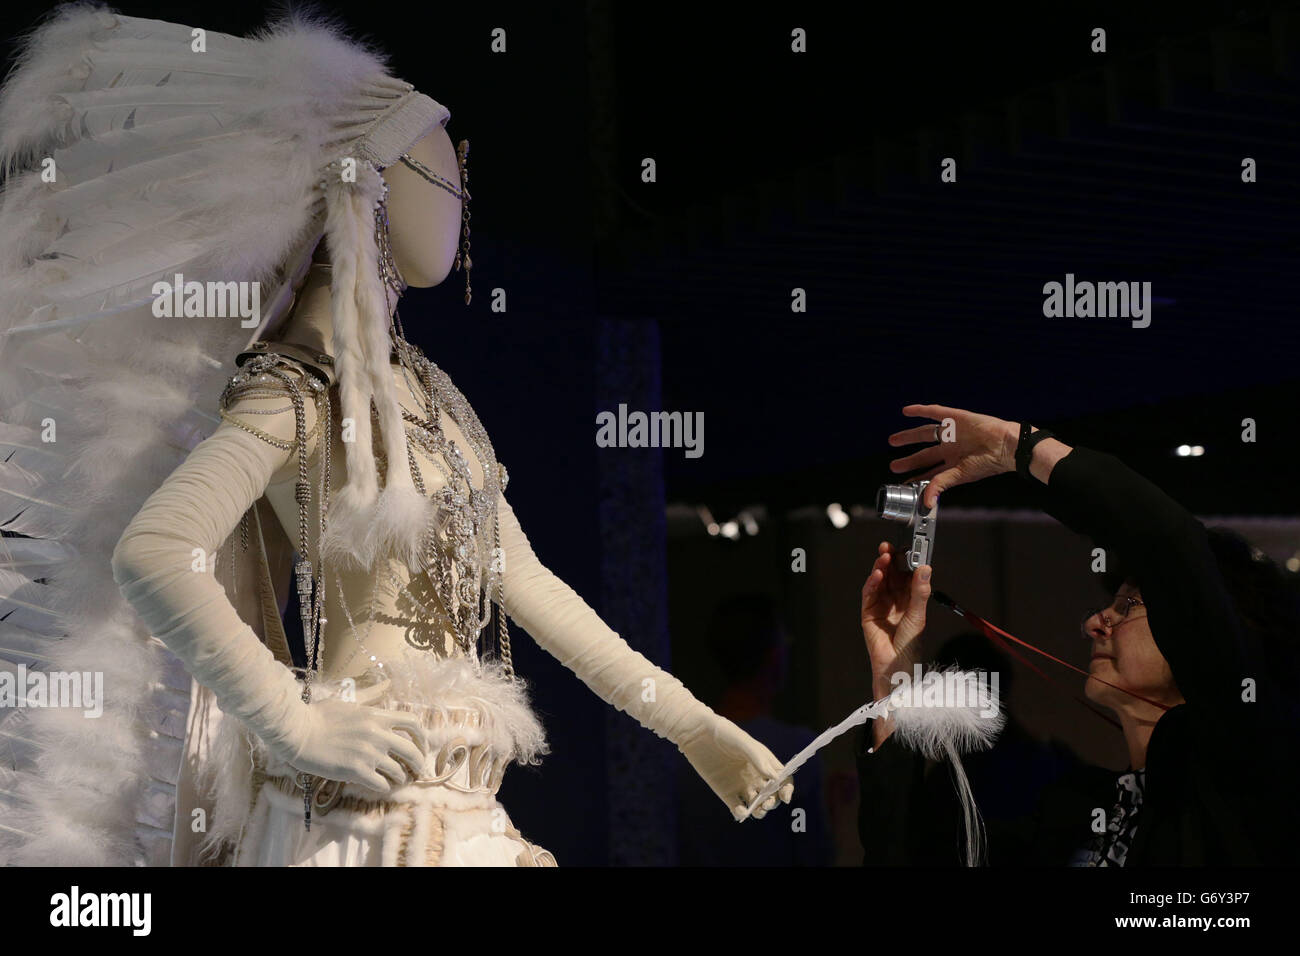 A visitor takes a photograph of clothes on display, during a media view of 'The Fashion World of Jean Paul Gaultier: From the Sidewalk to the Catwalk' - the first major exhibition devoted to the celebrated French couturier, including costumes for film and performance including the conical bra and corsets Madonna wore during her 1990 Blond Ambition World Tour, stage costumes designed for Kylie Minogue as well as pieces created for the films of Pedro Almodovar among others - at Barbican Art Gallery in London. Stock Photo